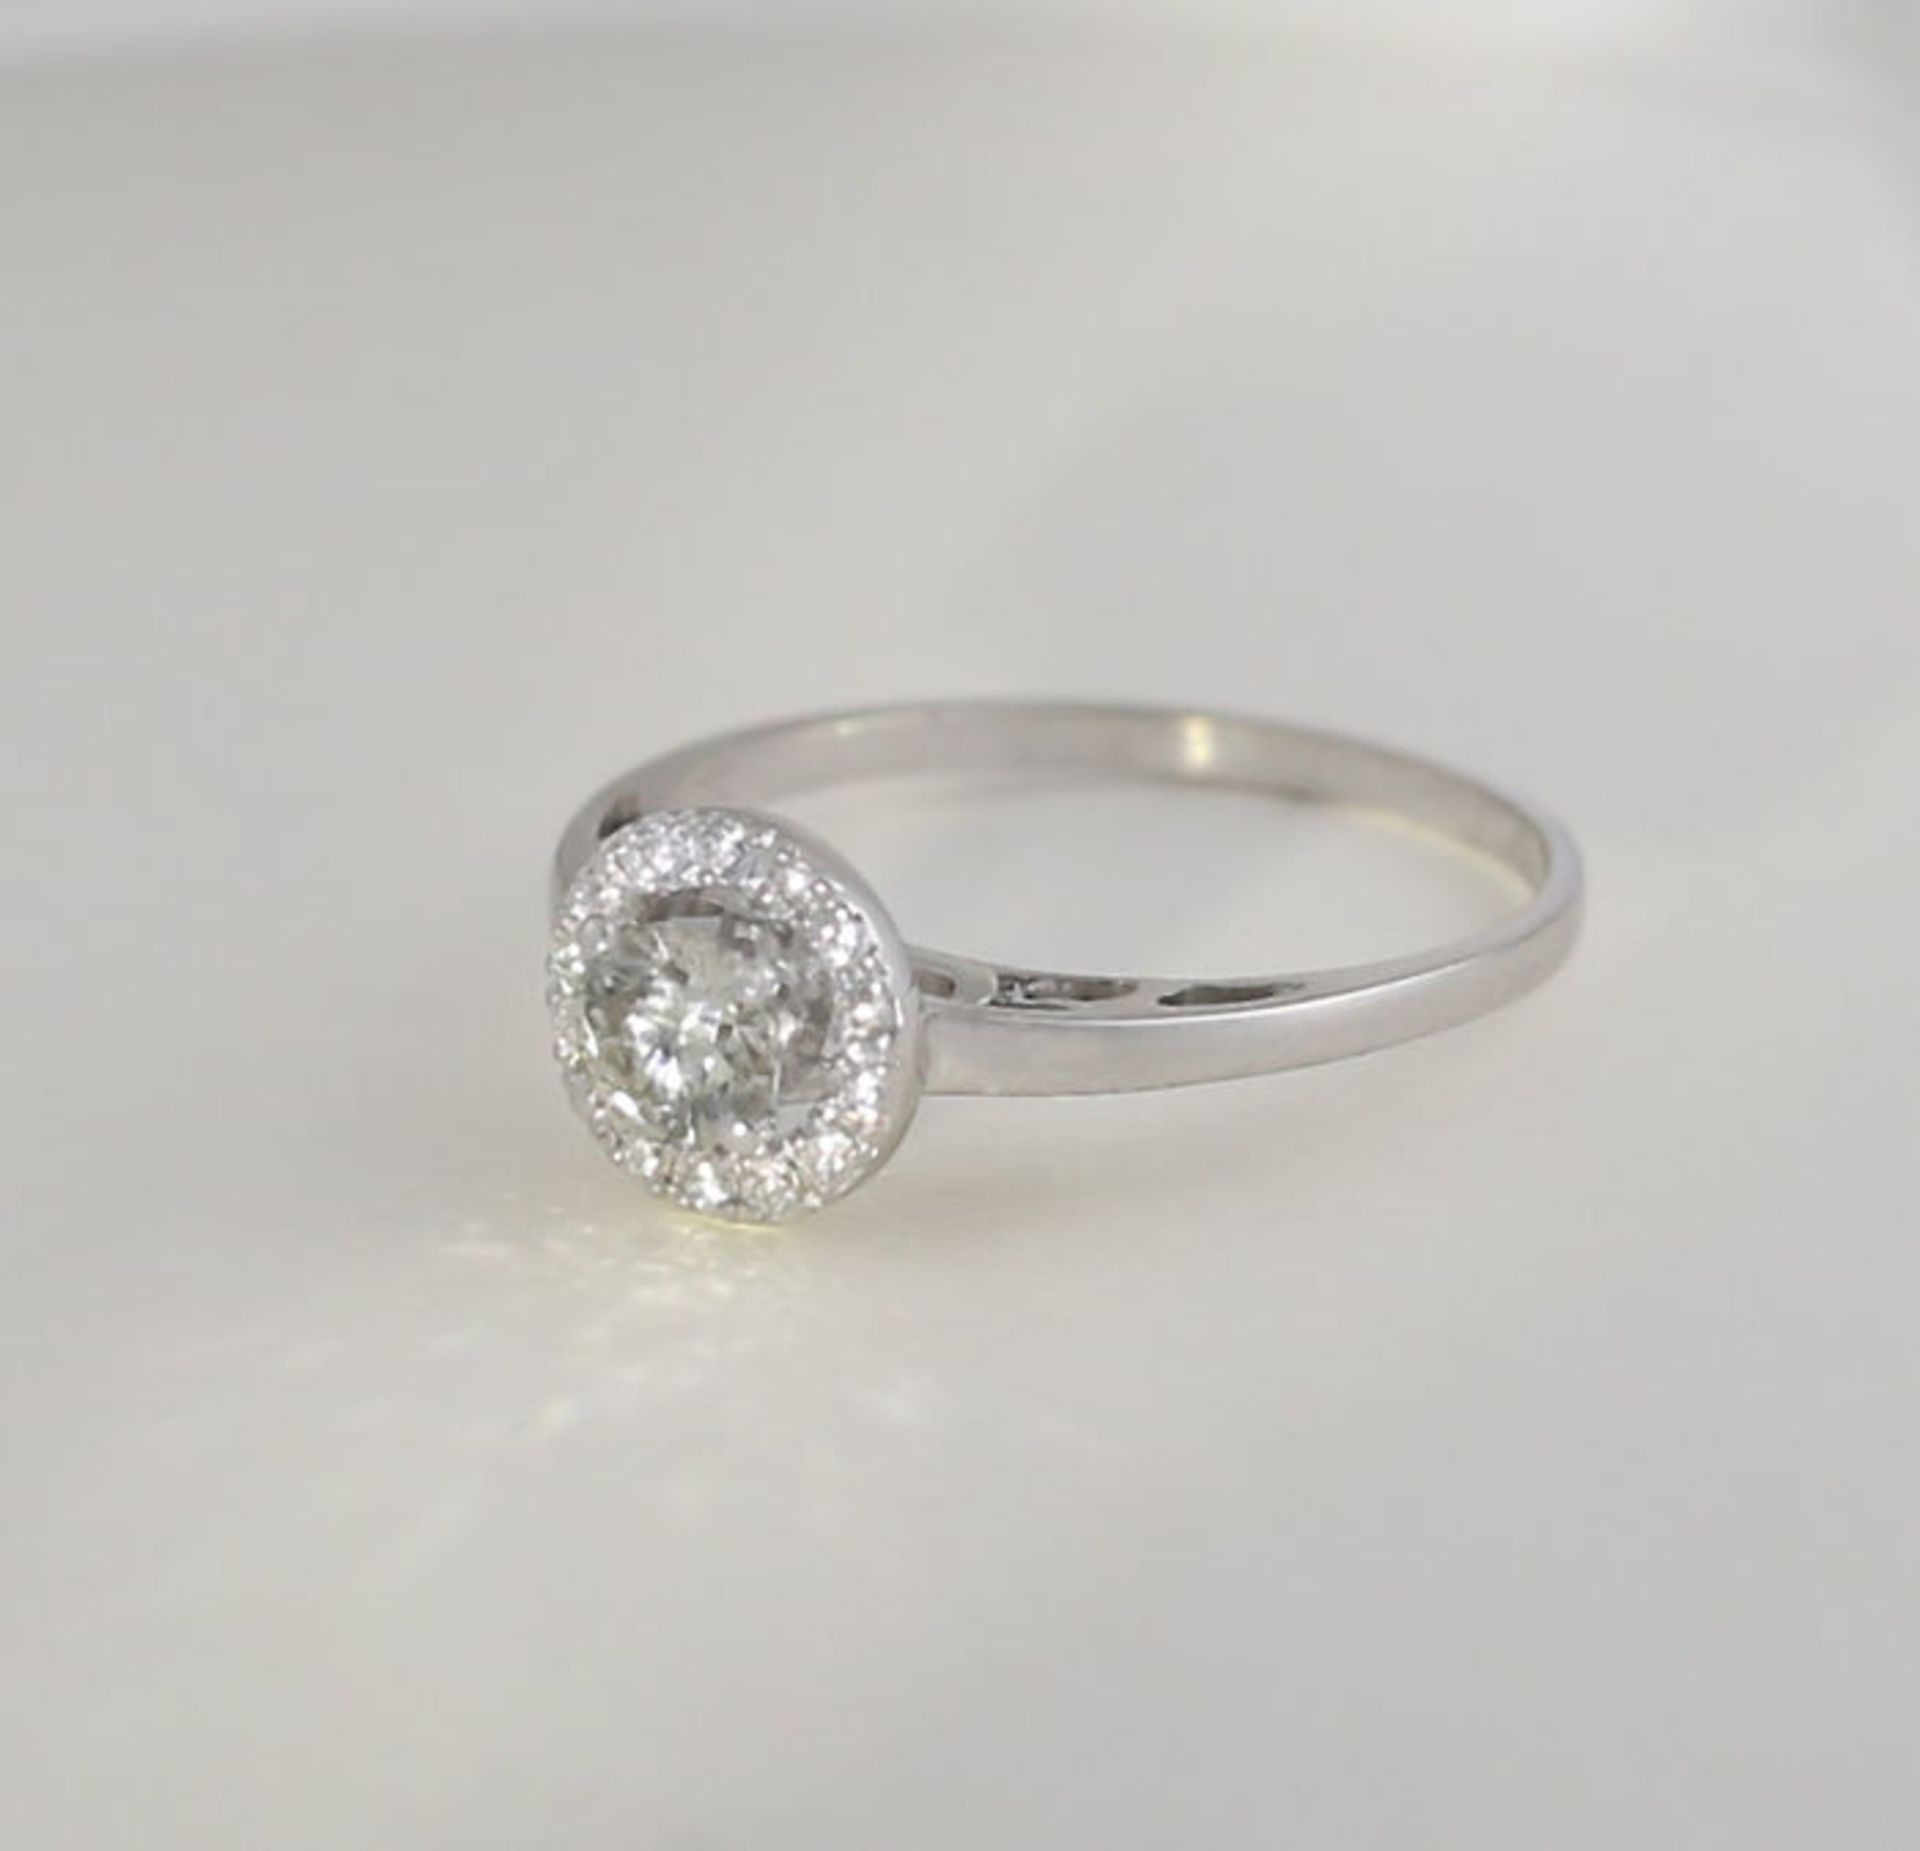 14 K / 585 White Gold Solitaire Diamond Ring - Image 3 of 7